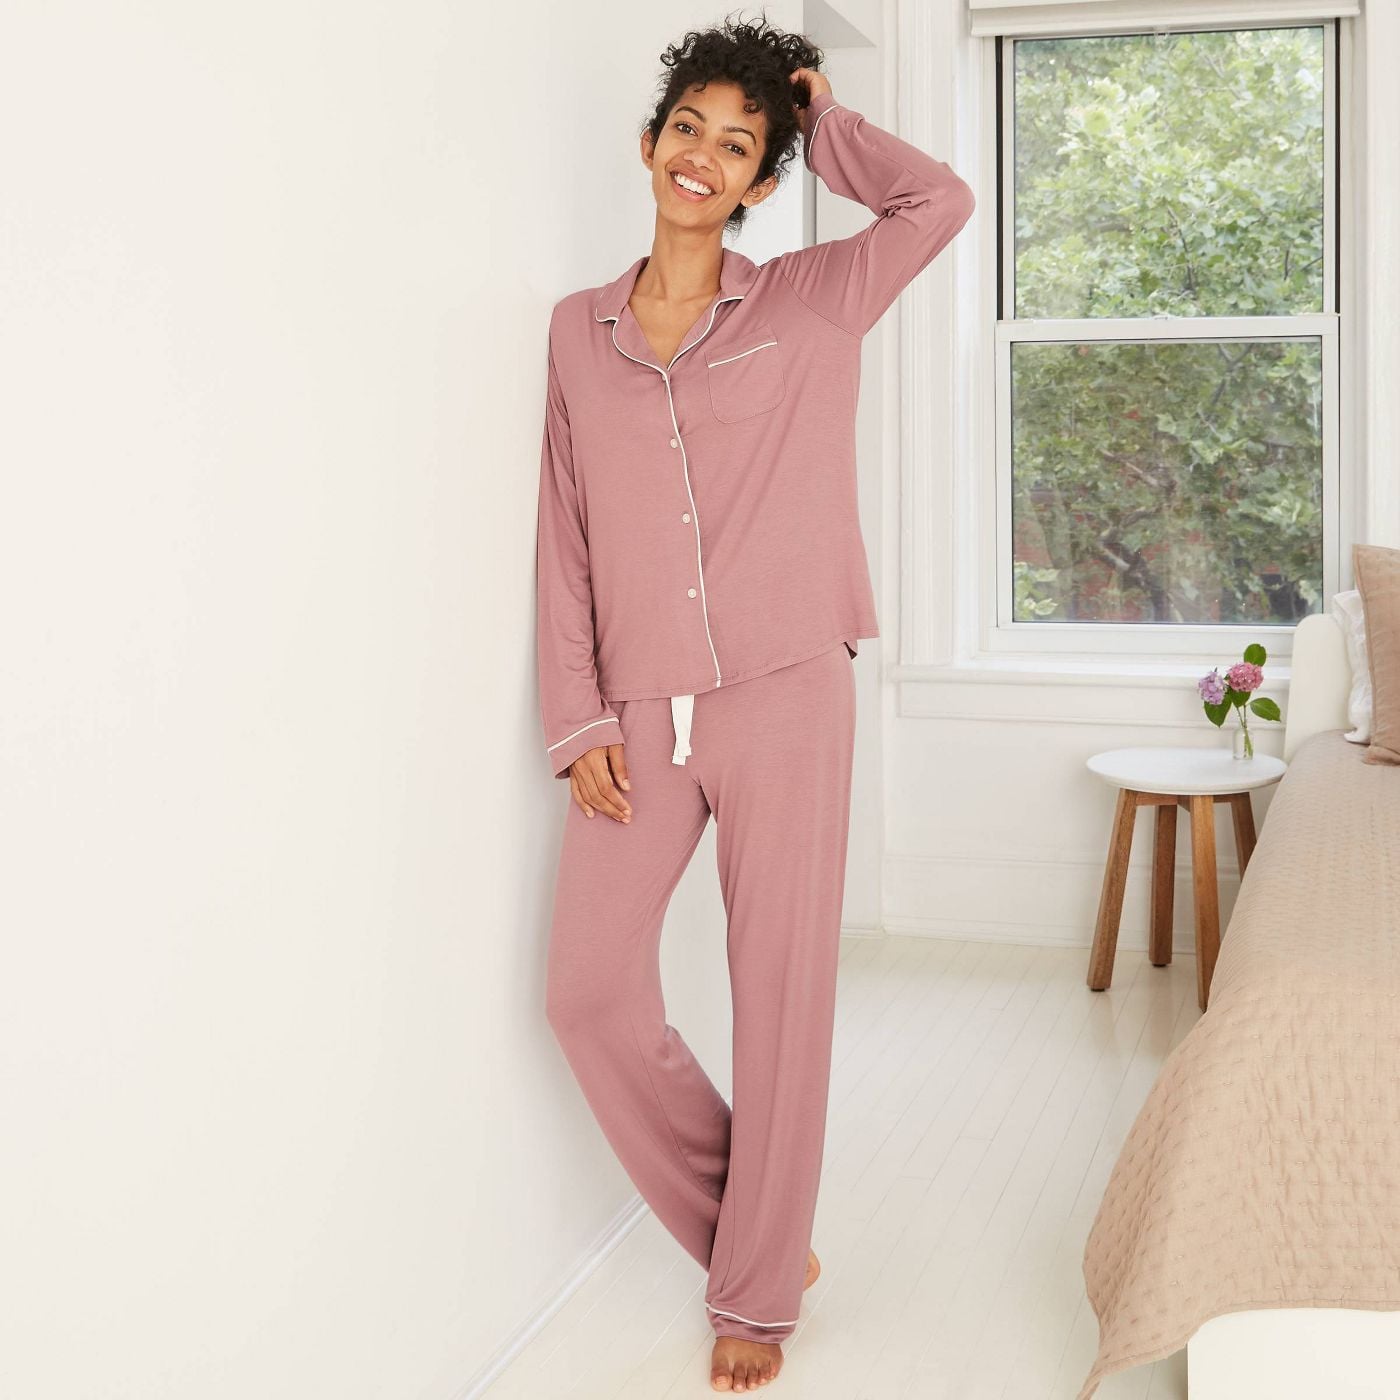 Stars Above Women's Beautifully Soft Notch Collar Top and Pants Pajama Set  in Mauve, I Couldn't Resist These Butter-Soft PJs at Target — and at $22,  I May Need Another Set